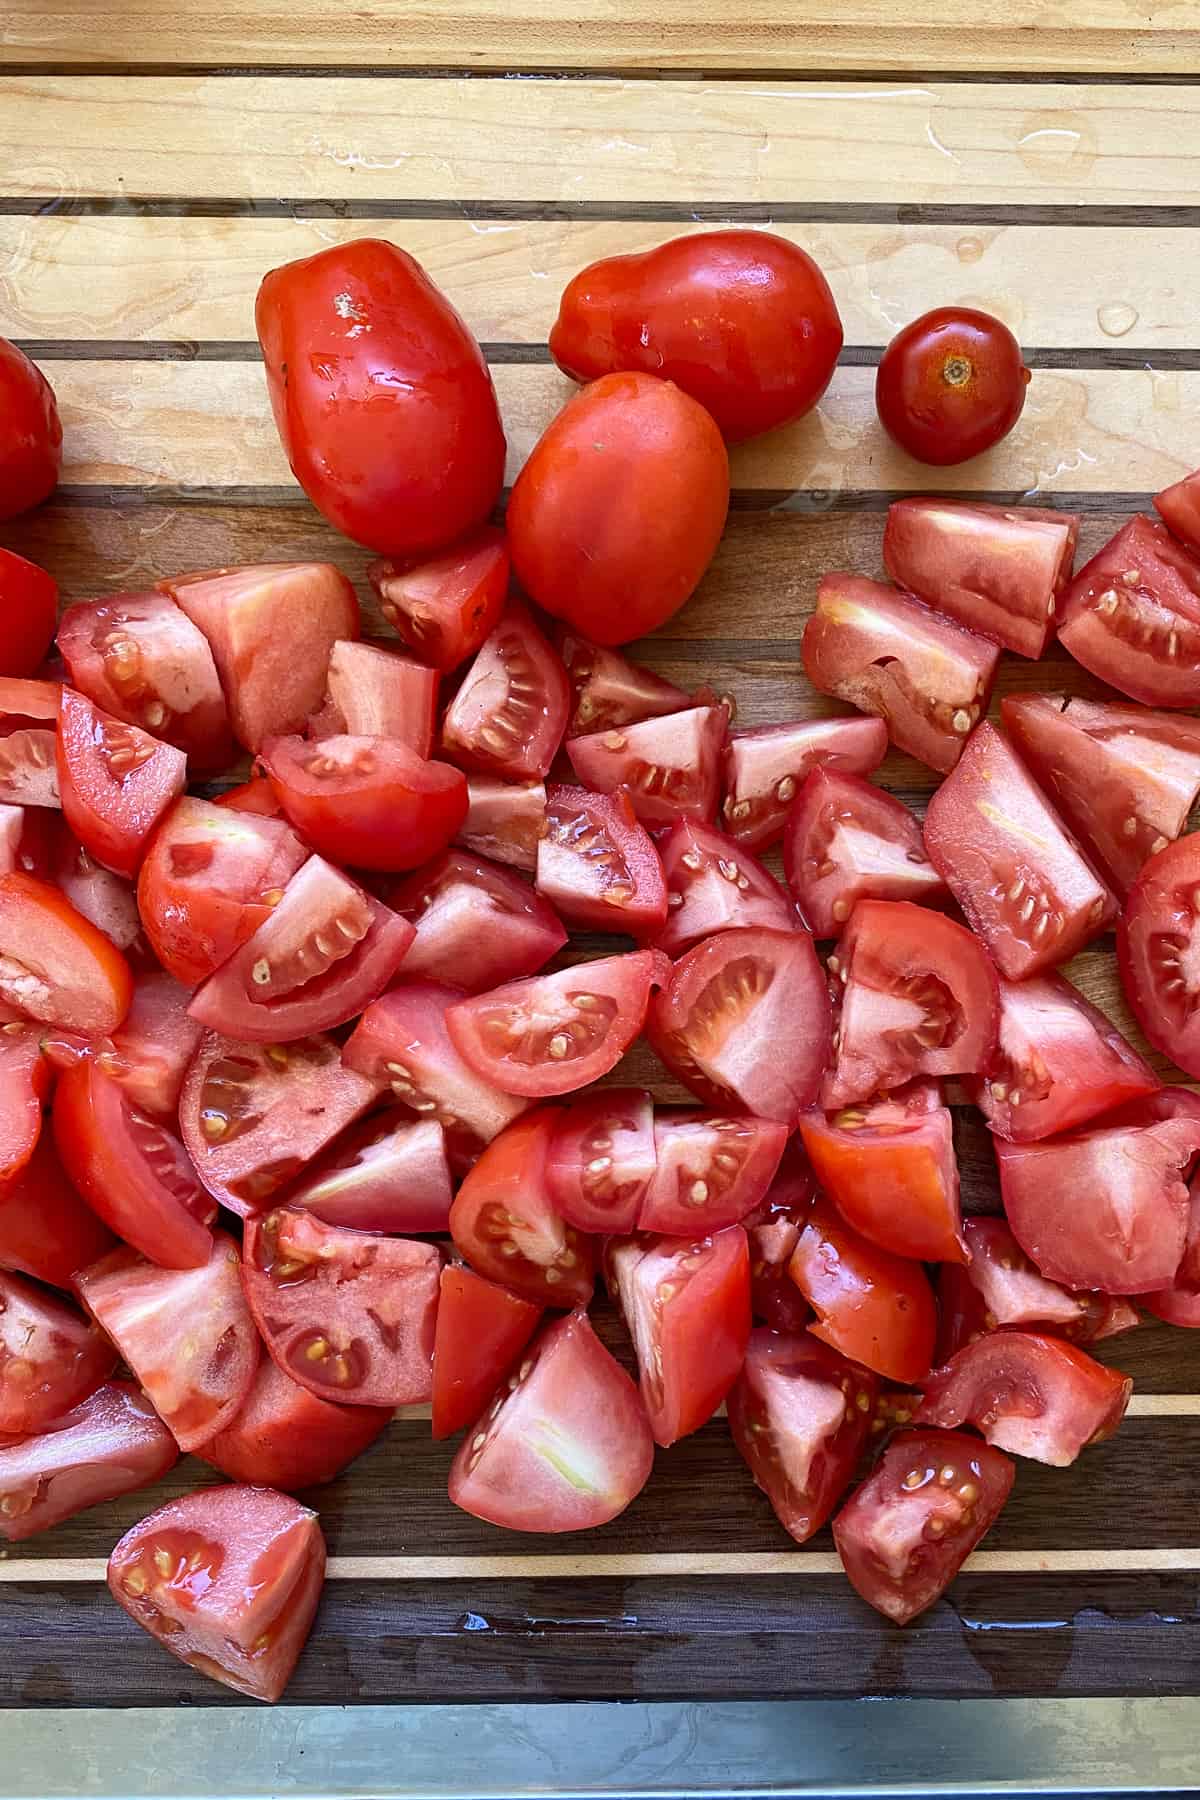 Chopped tomatoes on wooden cutting board